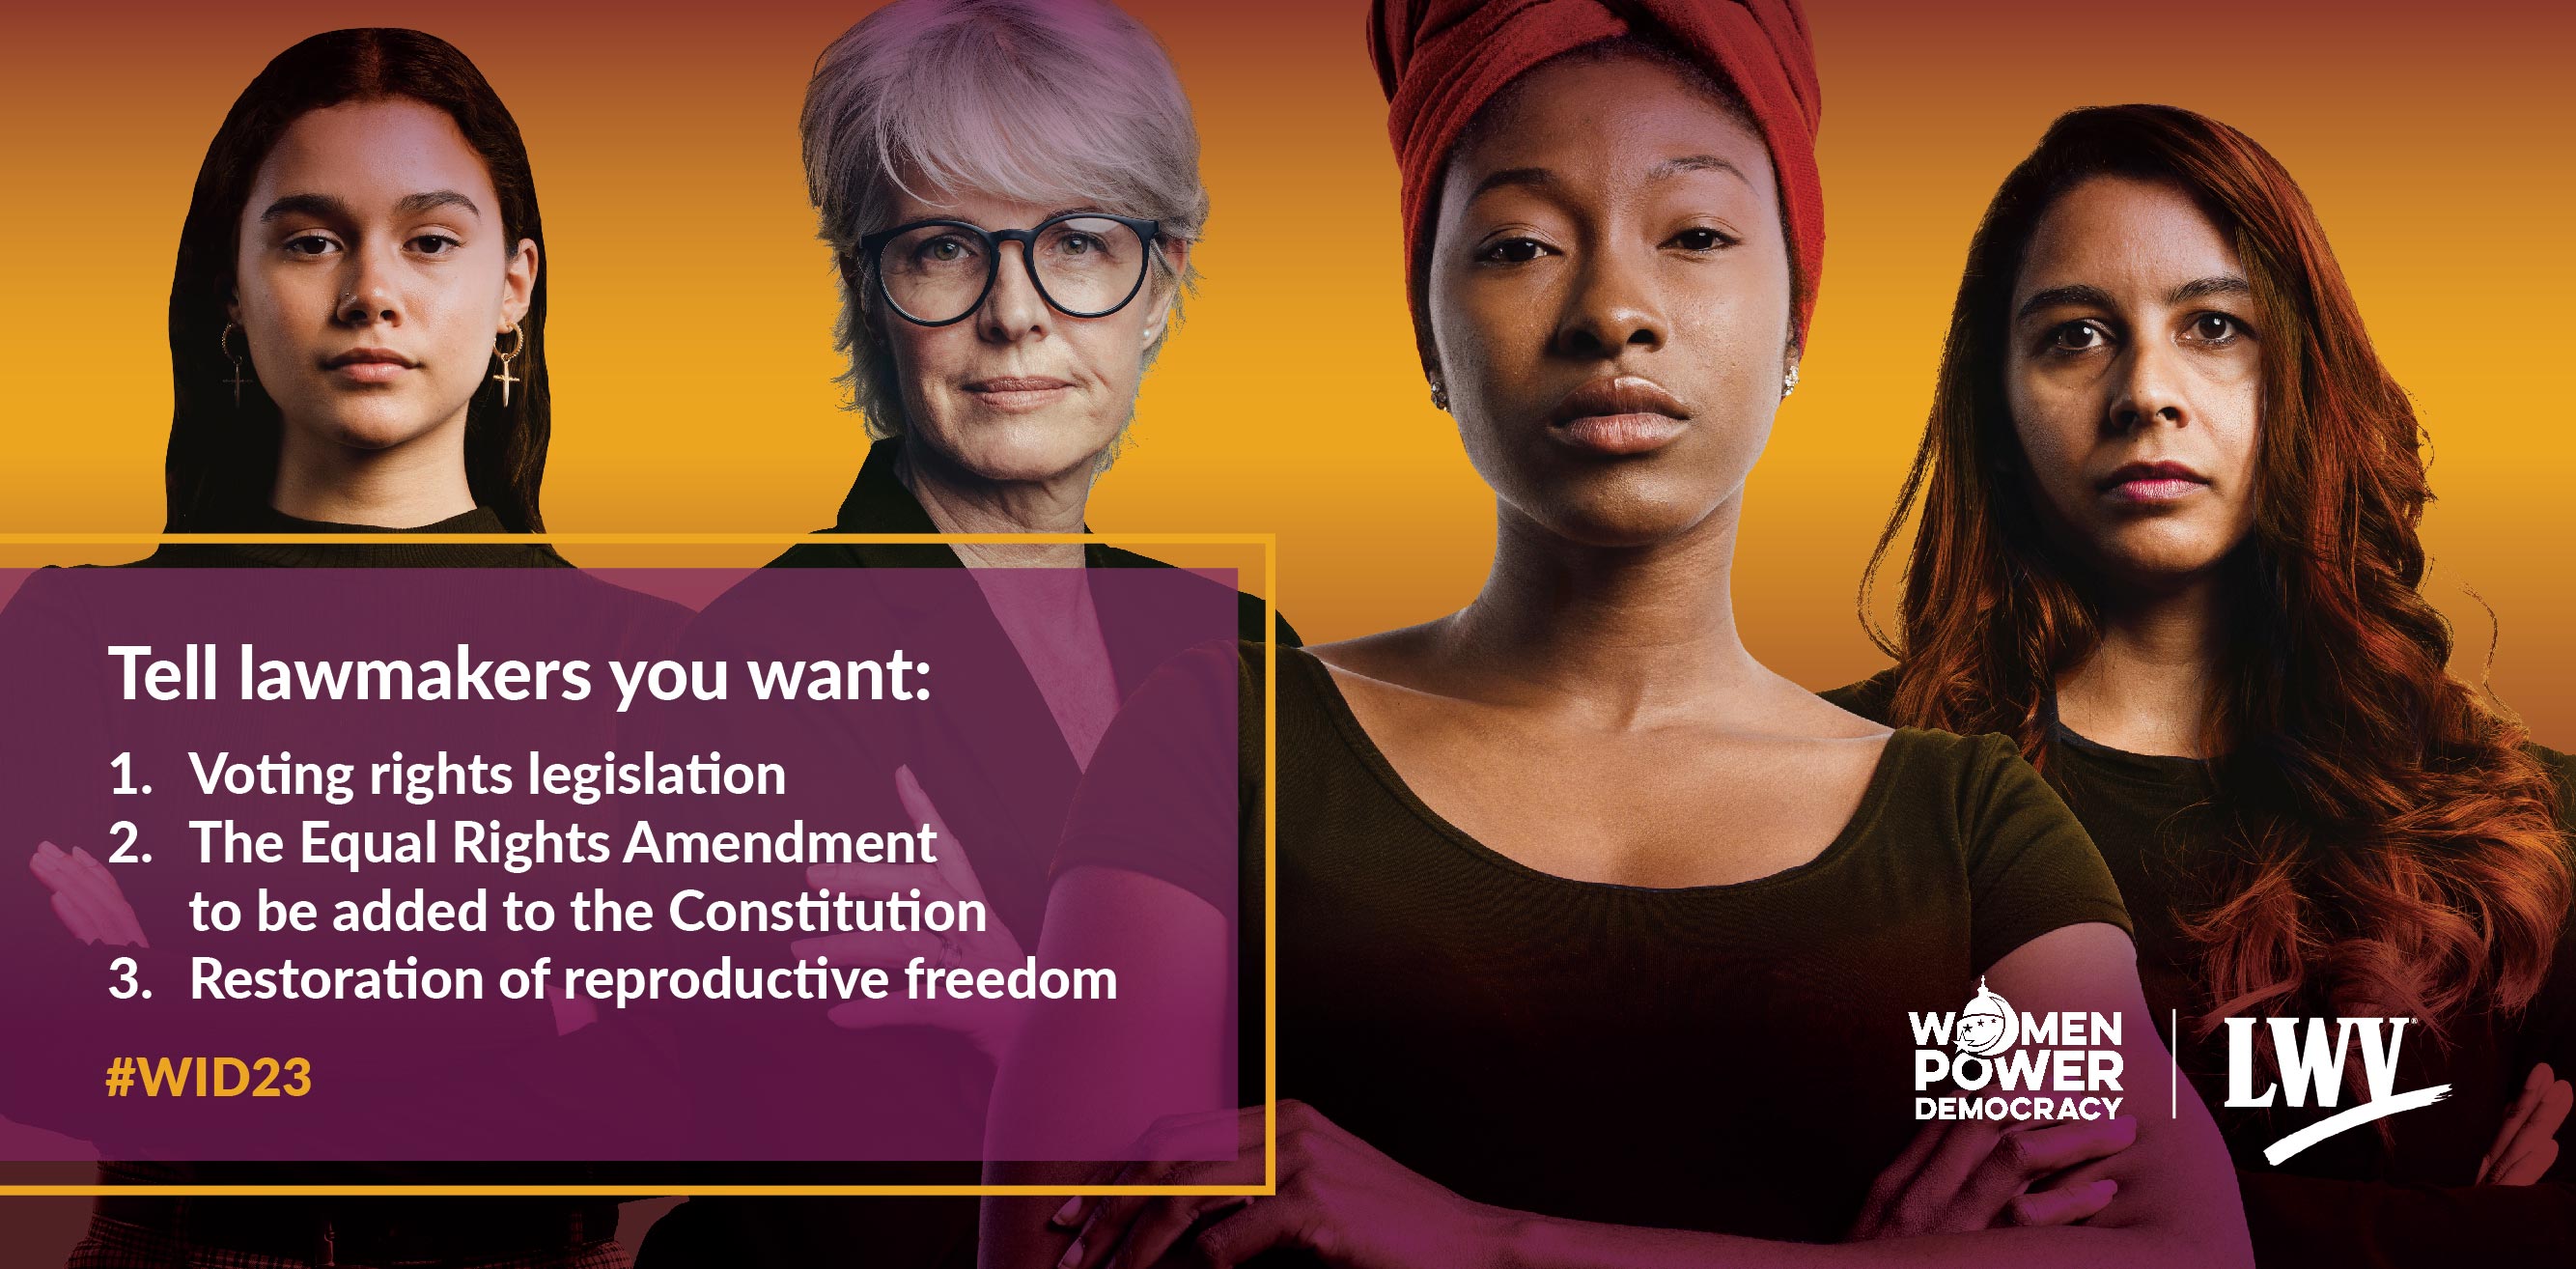 Four women standing in front of an orange gradient background. There is a purple translucent box in the bottom left that says: "Tell lawmakers you want: 1. Voting rights legislation; 2. The Equal Rights Amendment to be added to the Constitution; 3. The restoration of reproductive freedom. #WID23"